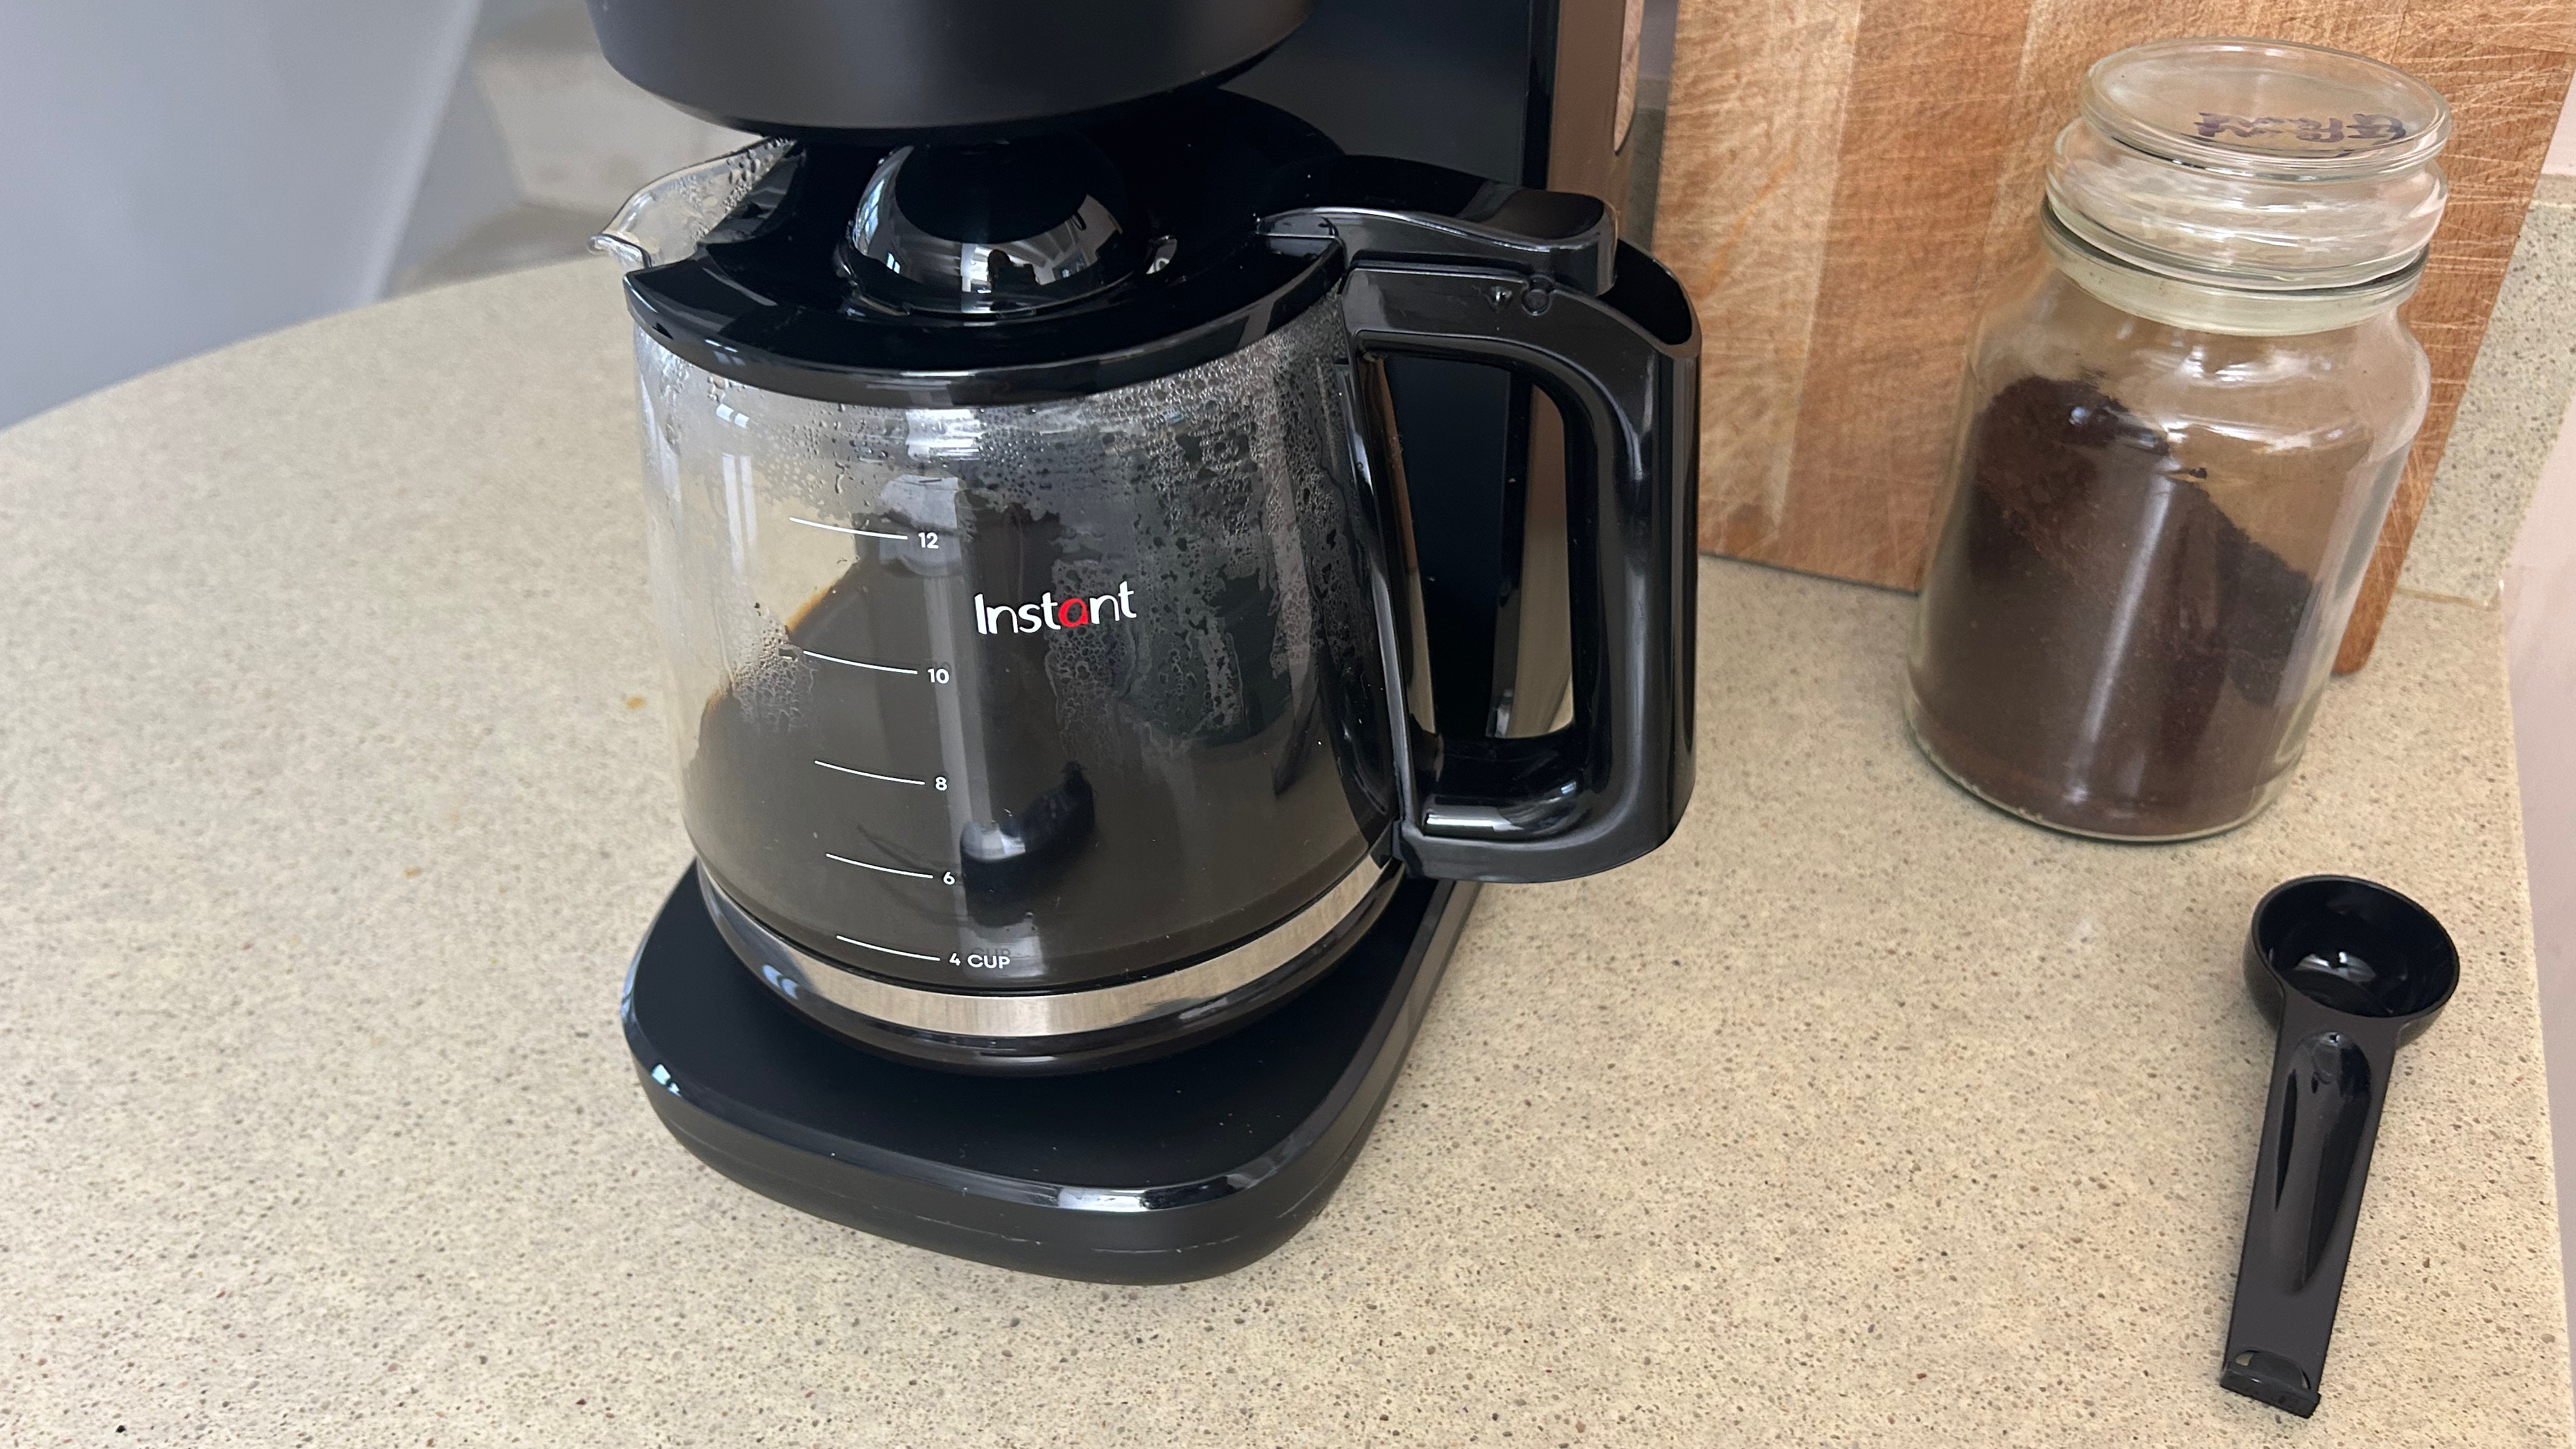 amazon, instant infusion brew 12-cup coffee maker review: a simple and affordable coffee maker